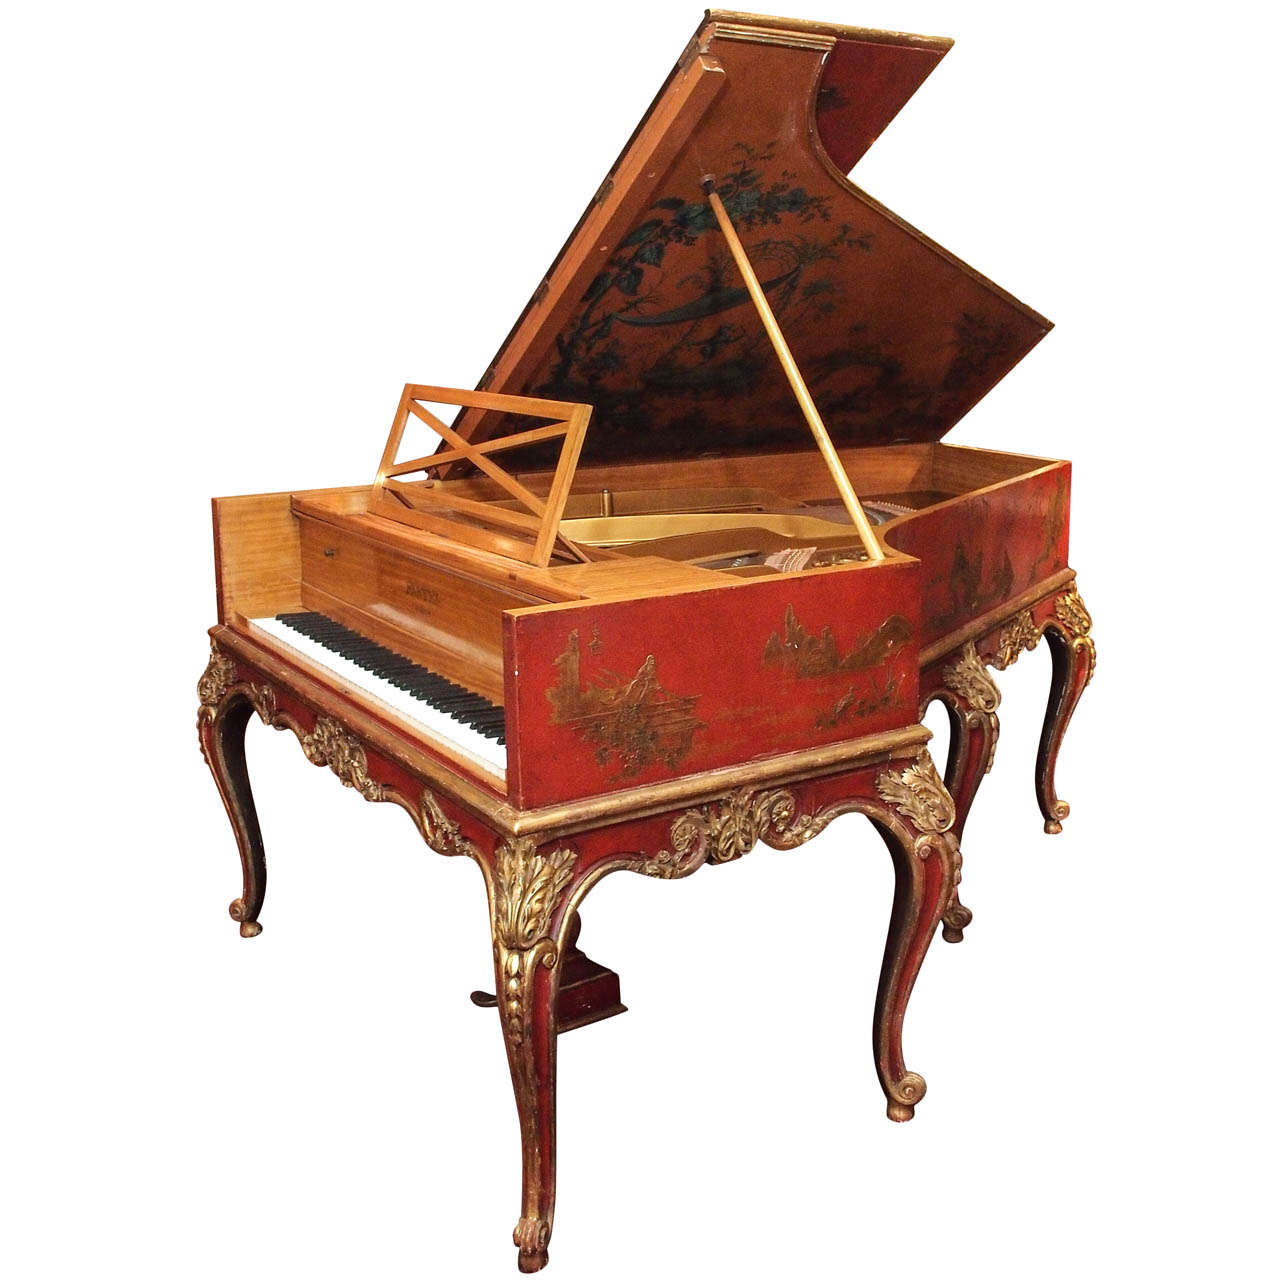 Antique French Pleyel Piano with Exceptional Lacquer Case circa 1890-1910